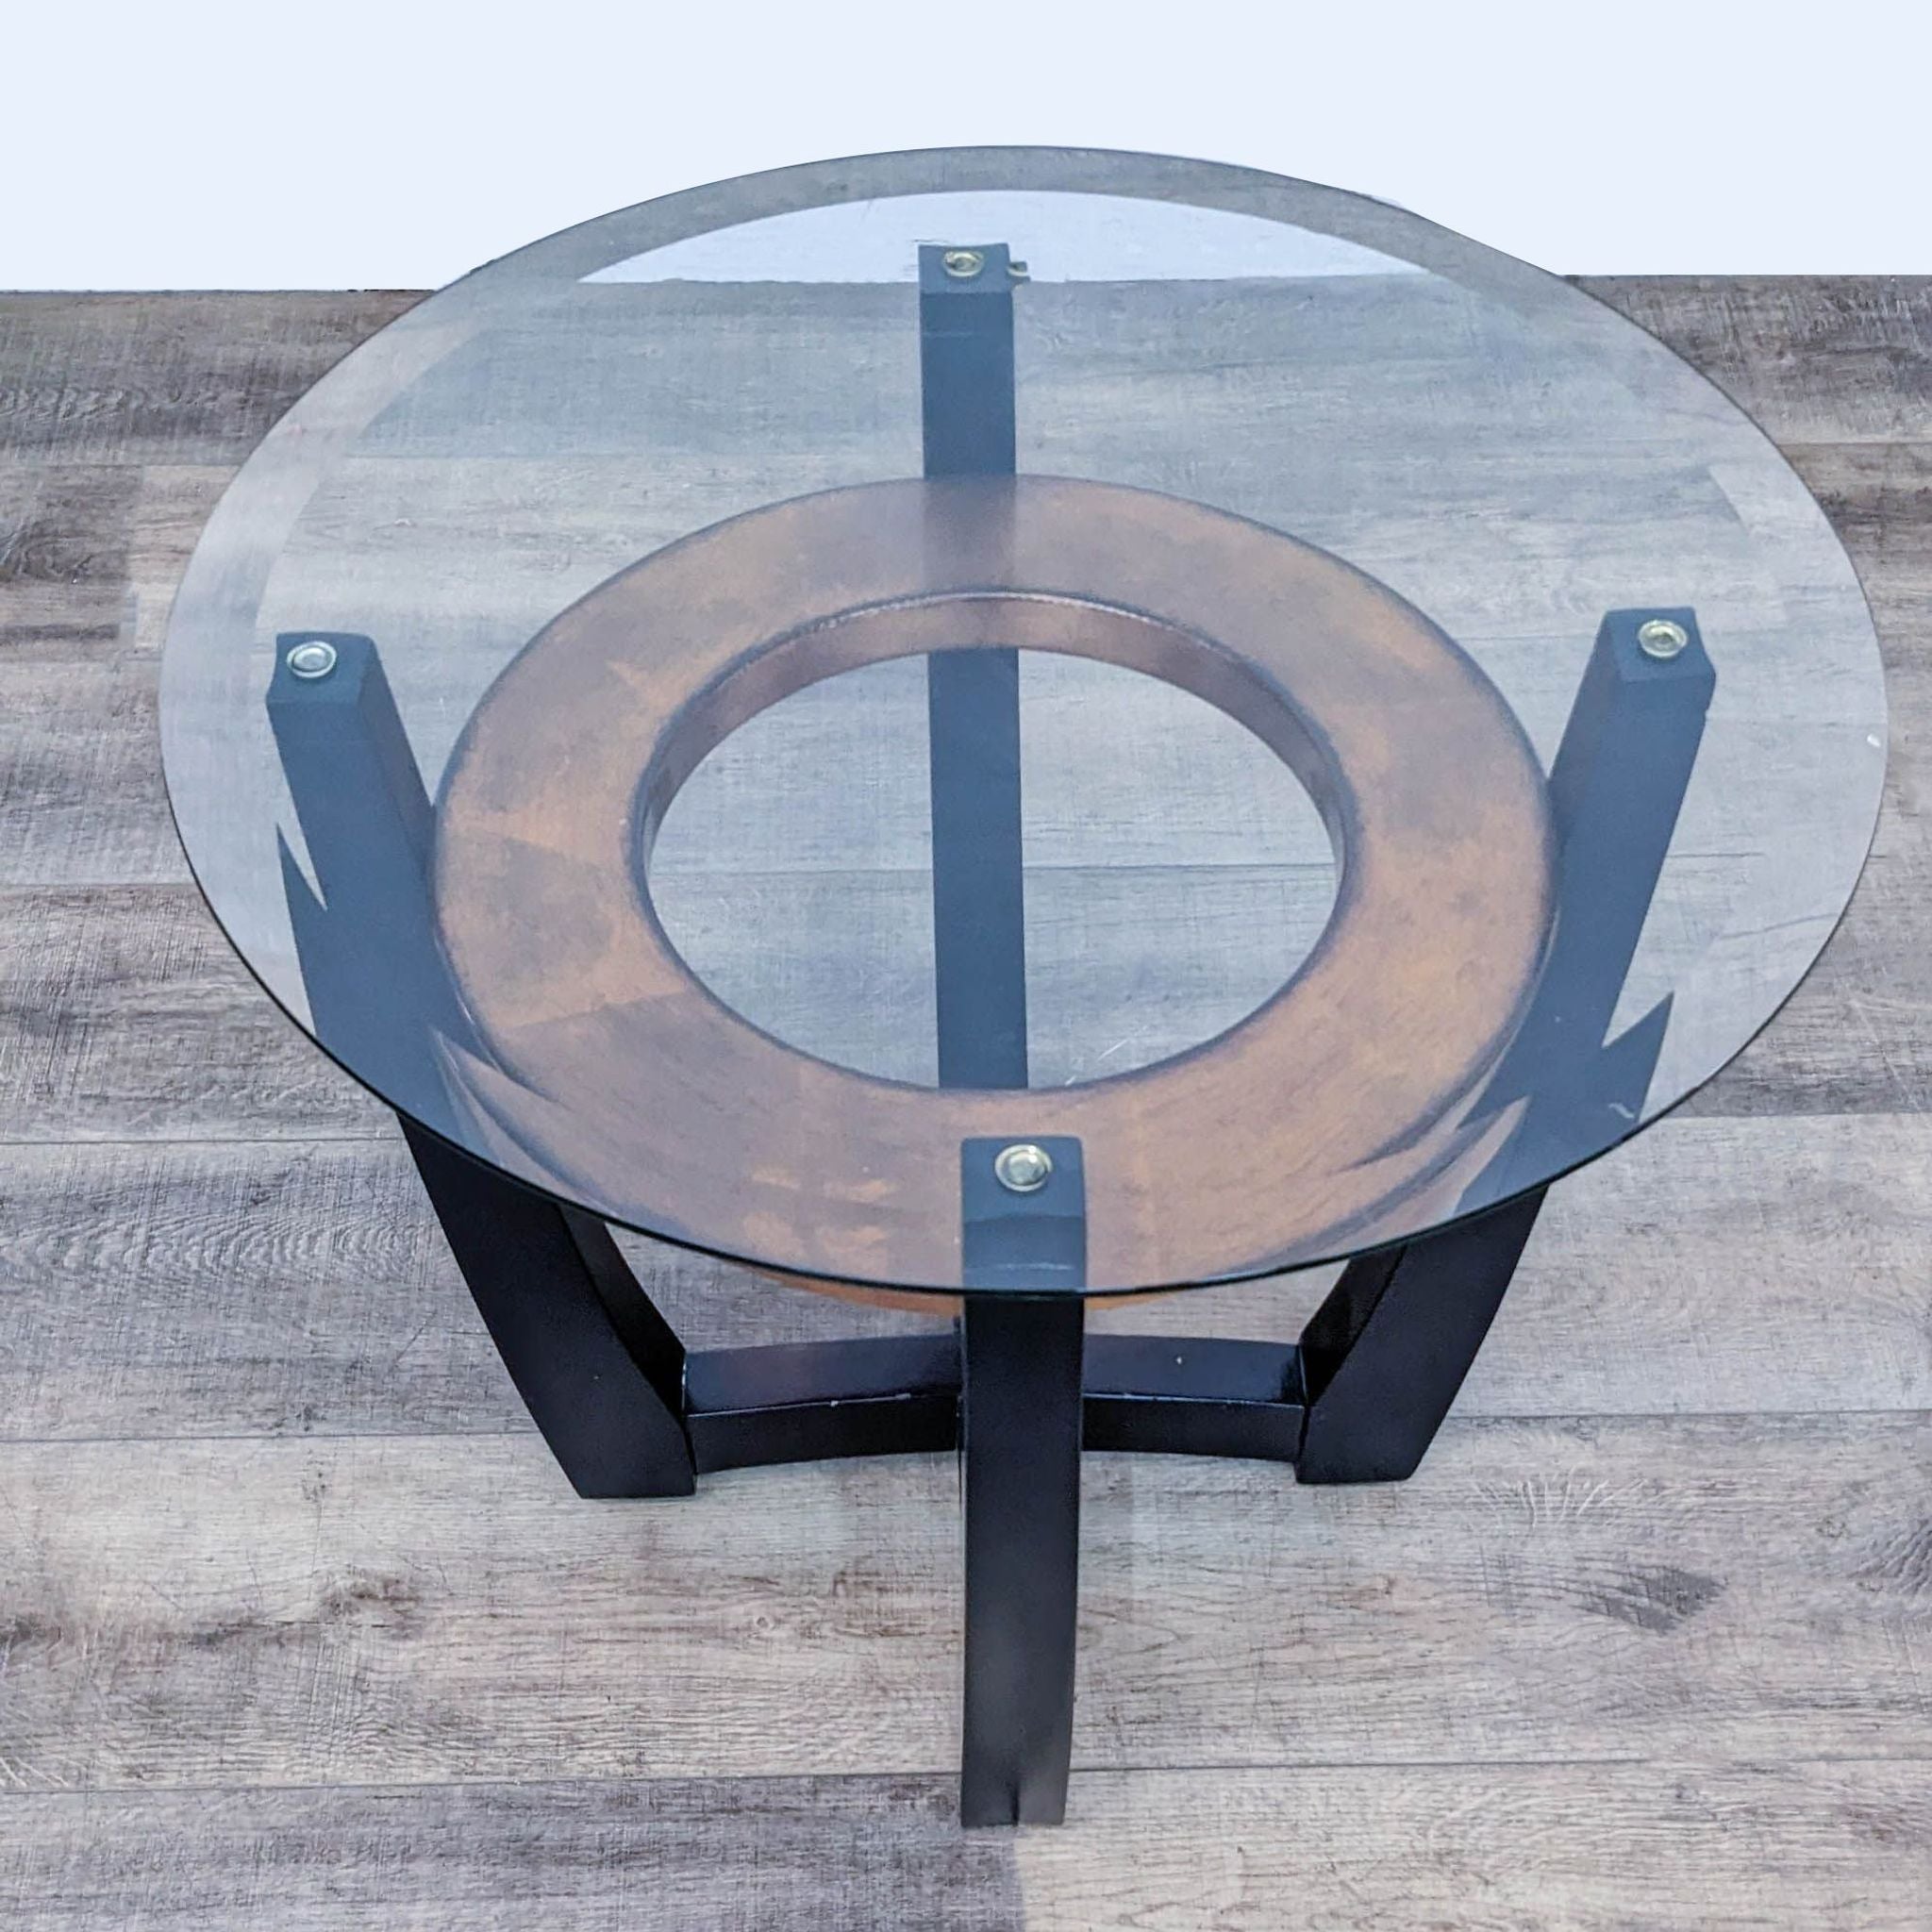 Reperch End Table with a transparent round glass top and circular wood base connected by black metal supports.